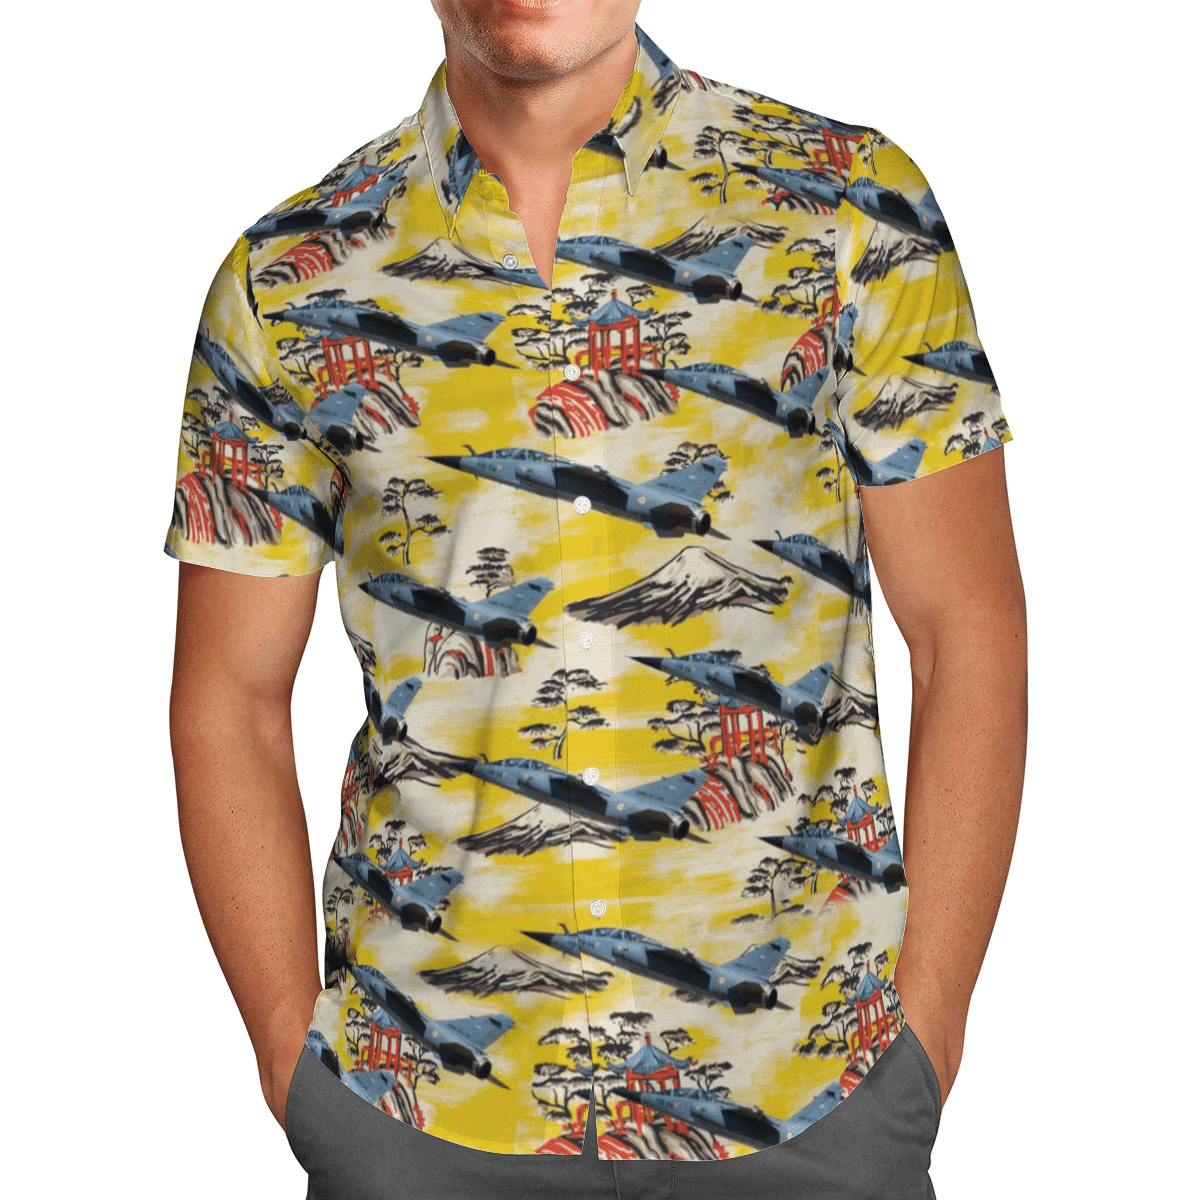 HOT Dassault Mirage F1 French Air Force All Over Print Tropical Shirt1